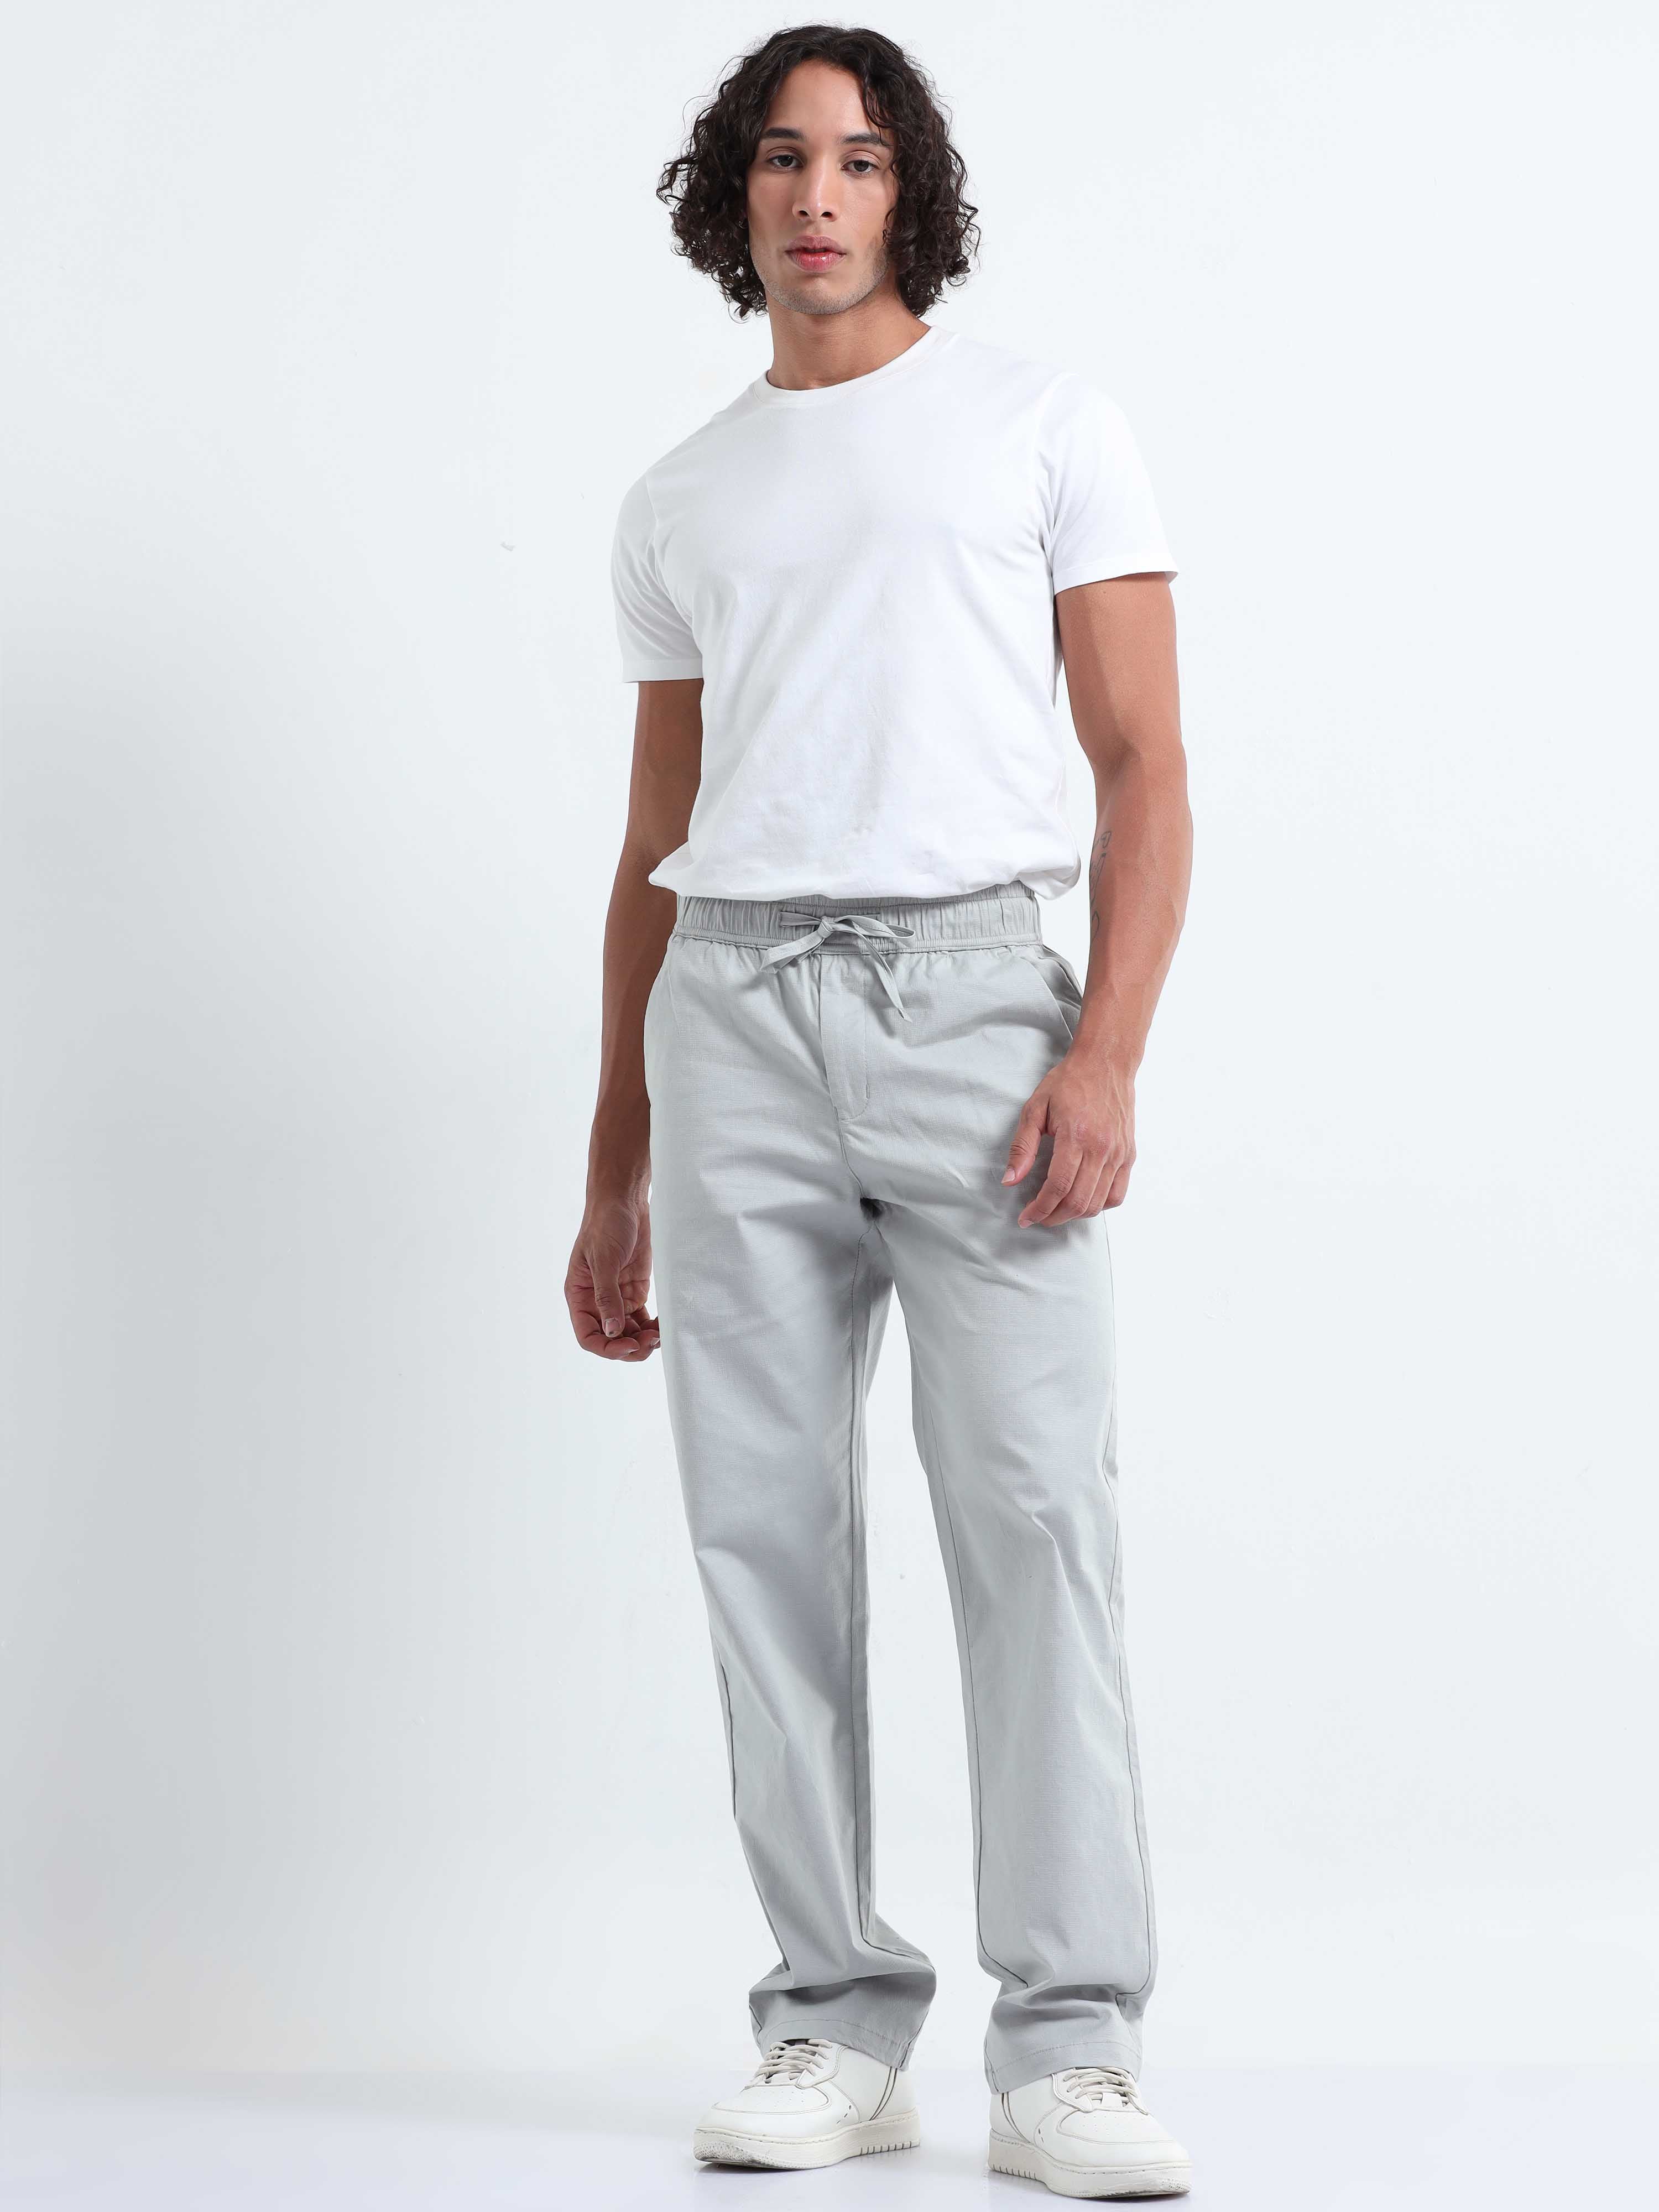 Verve Structural Grey Relaxed Pants for Men